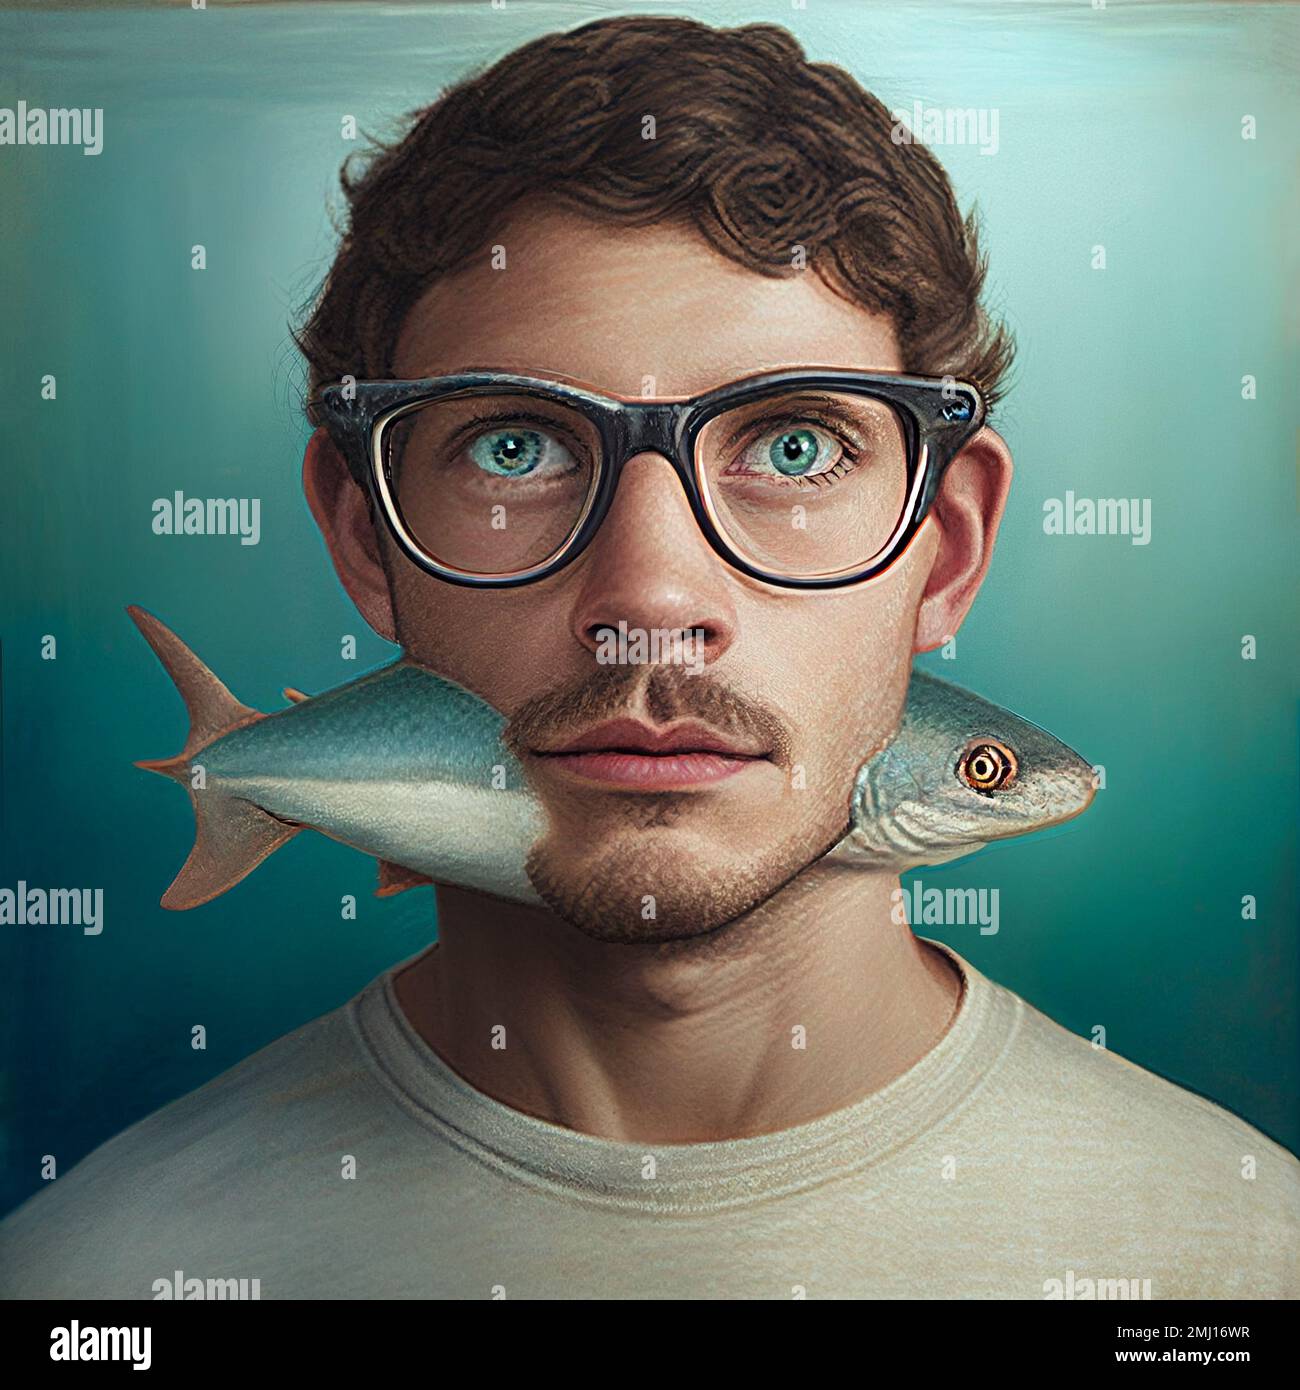 Portrait of a young man with a fish going through his chin, surreal fantasy creature, illustration Stock Photo